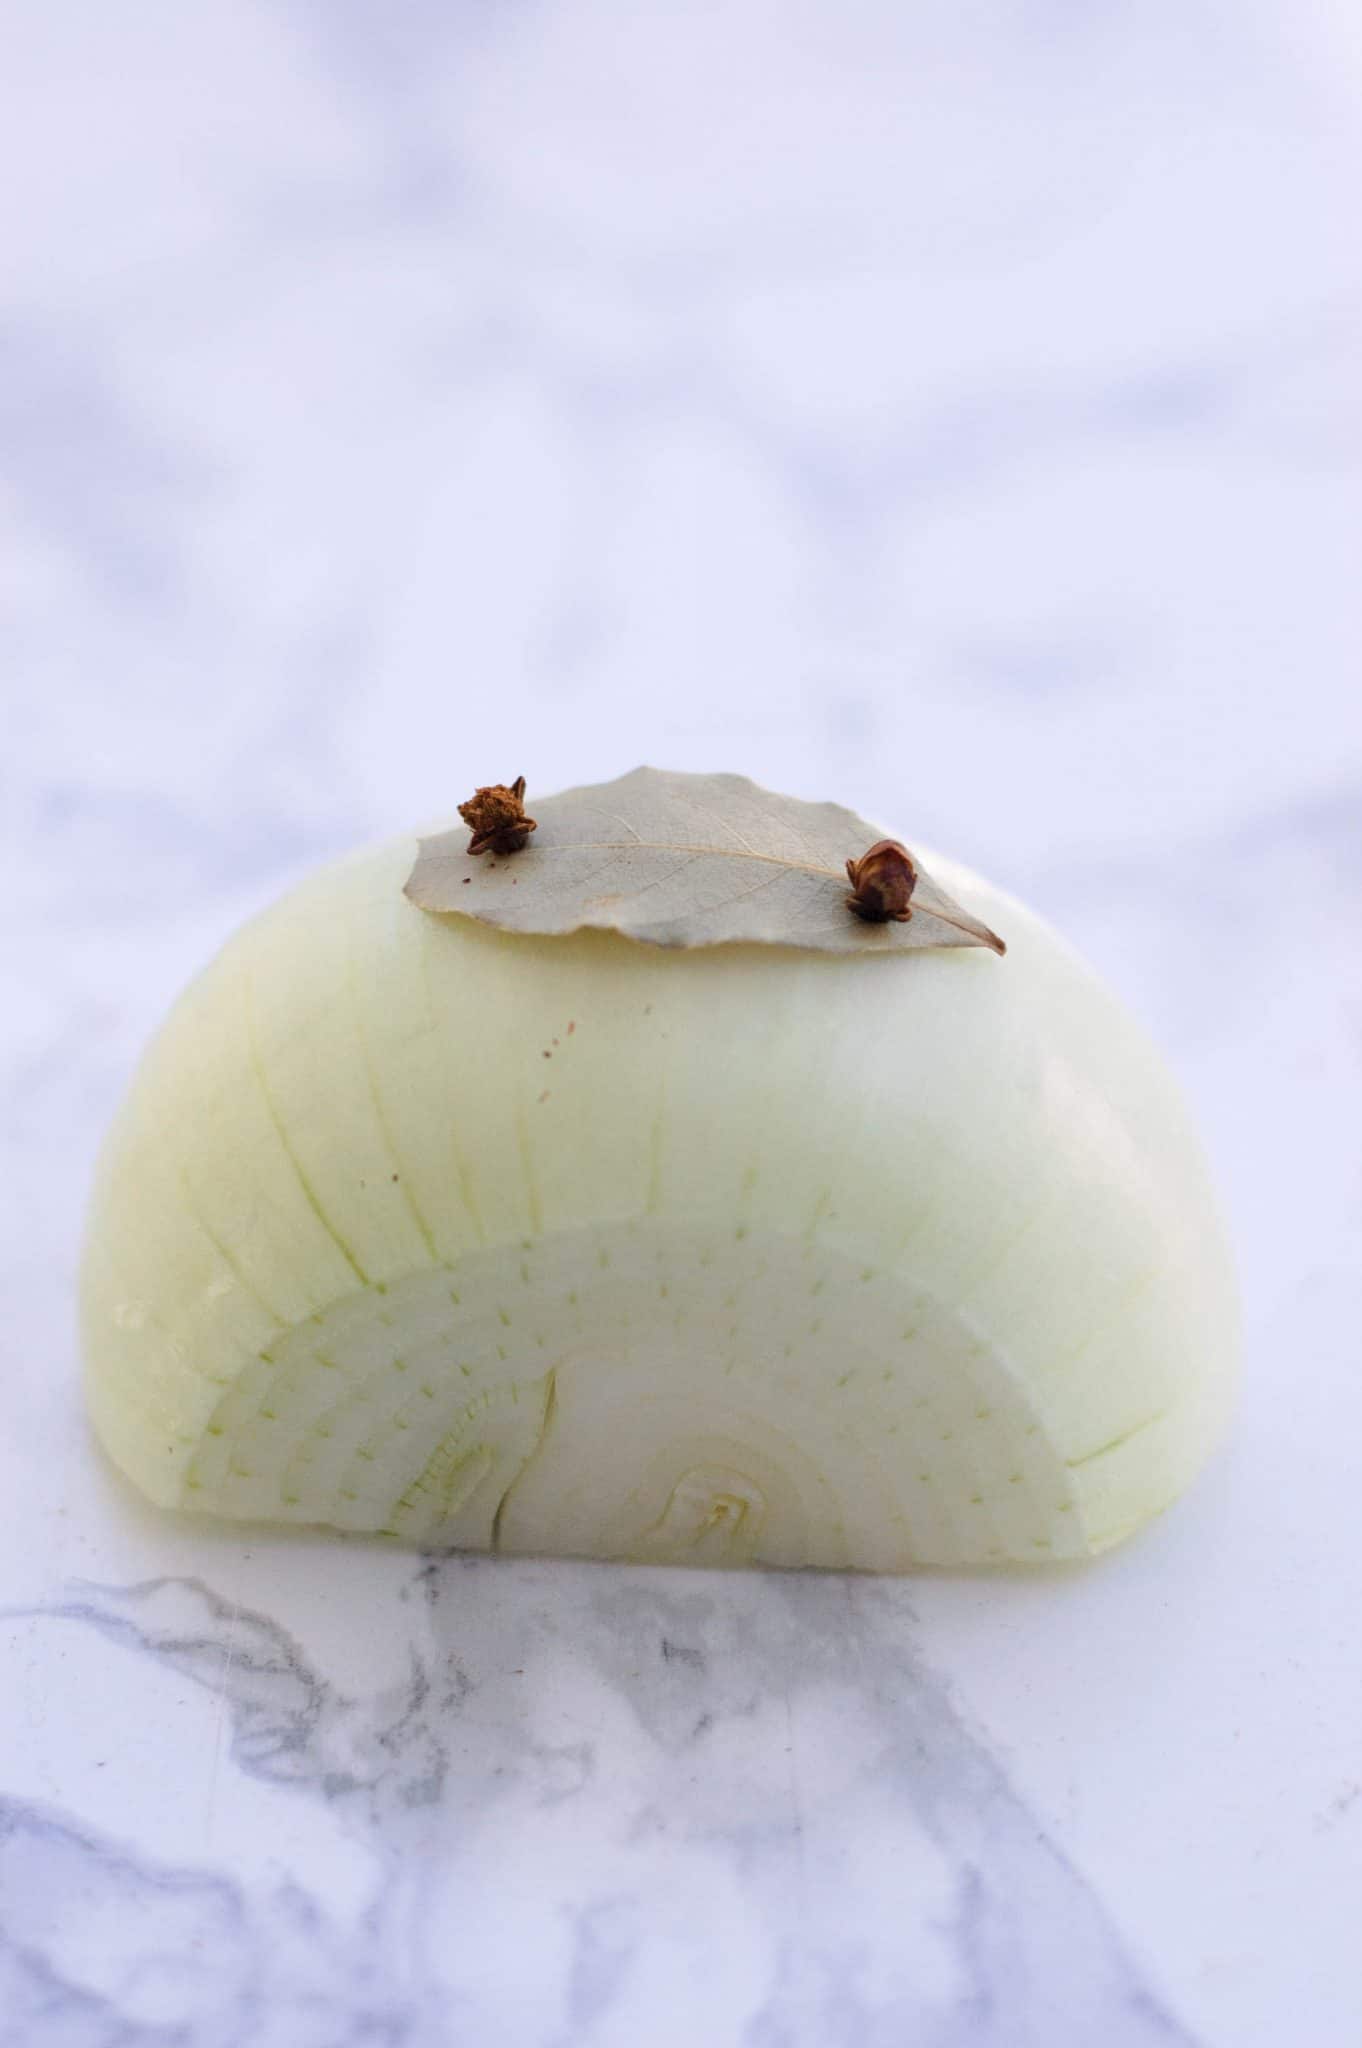 A onion pierced with cloves holding on a bay leaf.